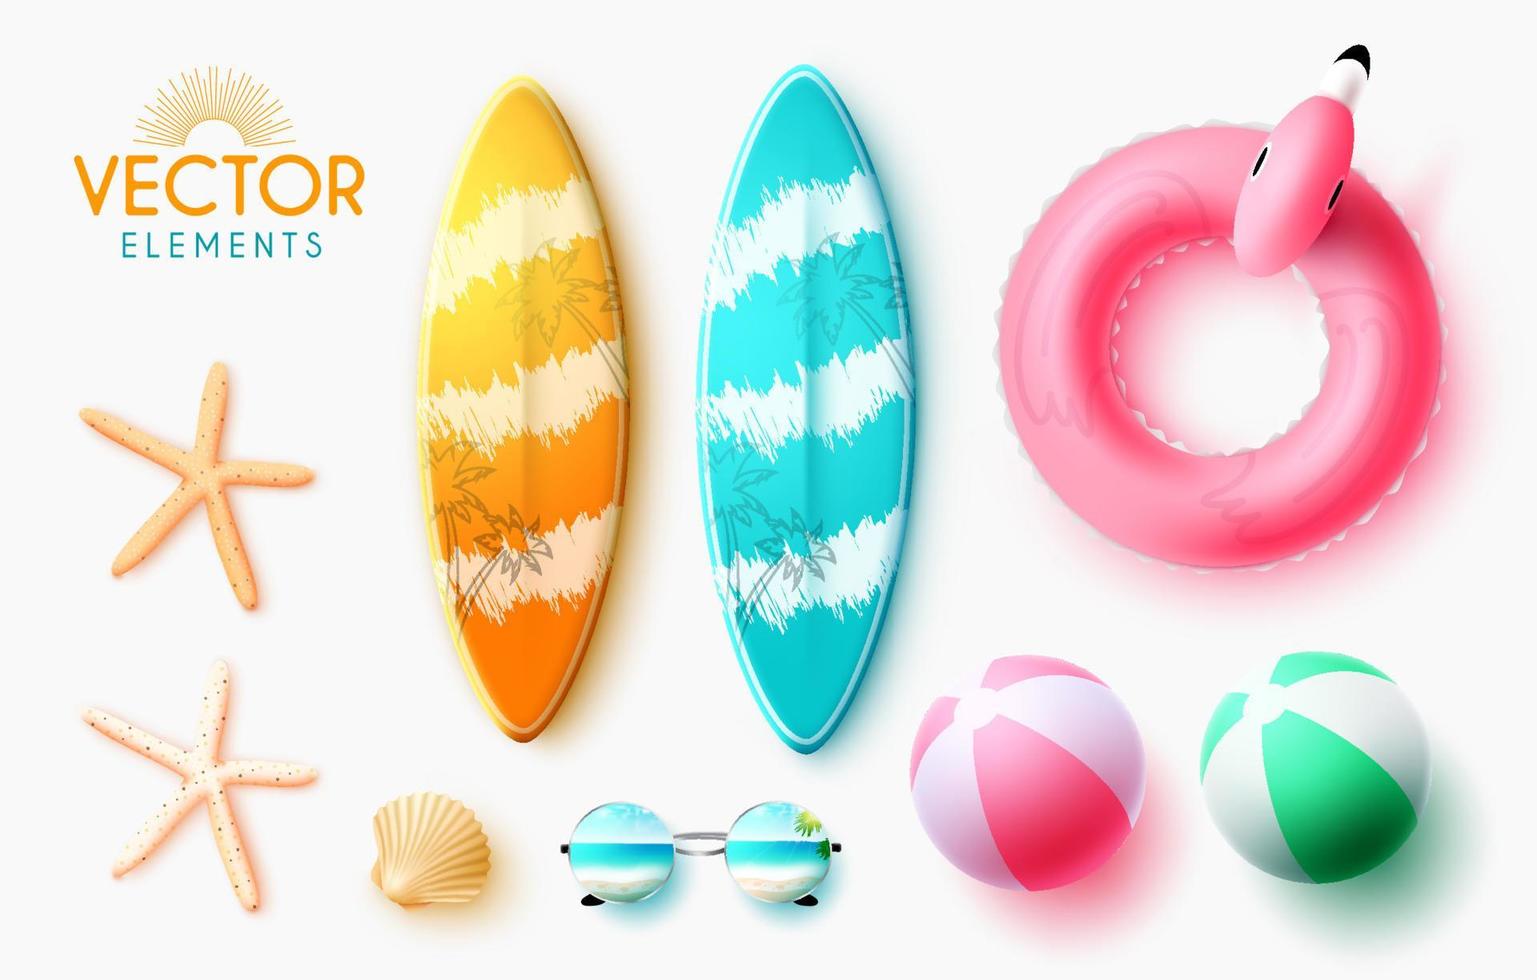 Summer elements vector set design. Summer 3d surfboards, beachball, floater and seashell element isolated in white background for tropical season collection. Vector illustration.